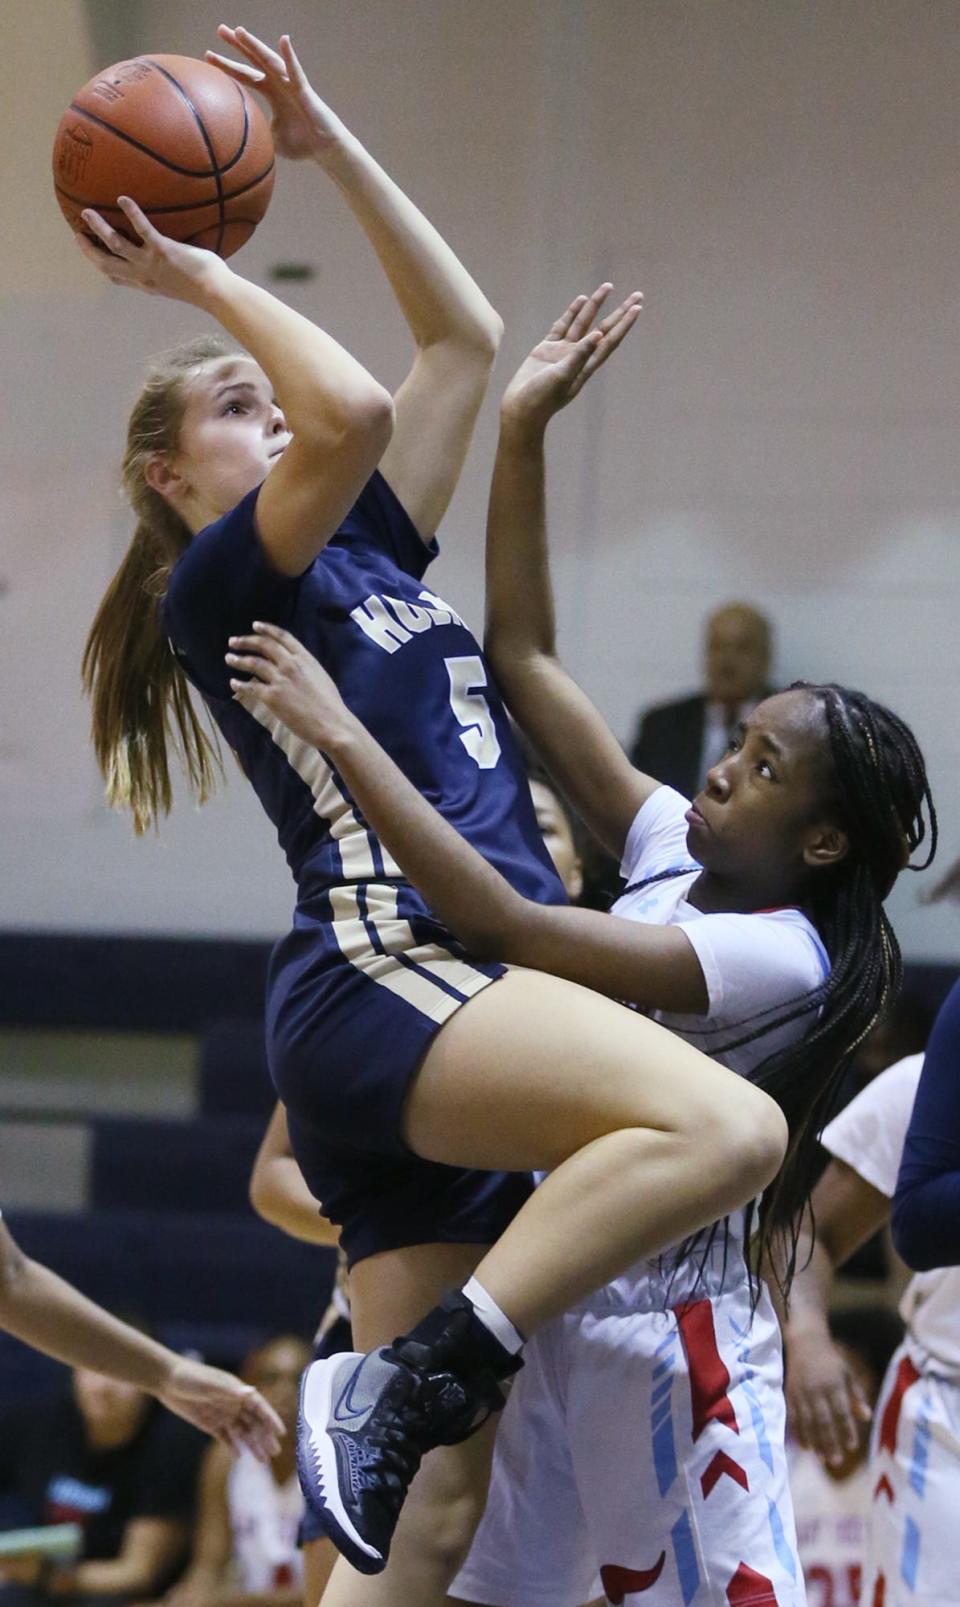 Archbishop Hoban's Rylee Bennett shoots over Villa Angela-St. Joseph's Chineye Obiechina in the first half of the Knights' 77-21 win Monday night in Akron. [Mike Cardew/Beacon Journal]